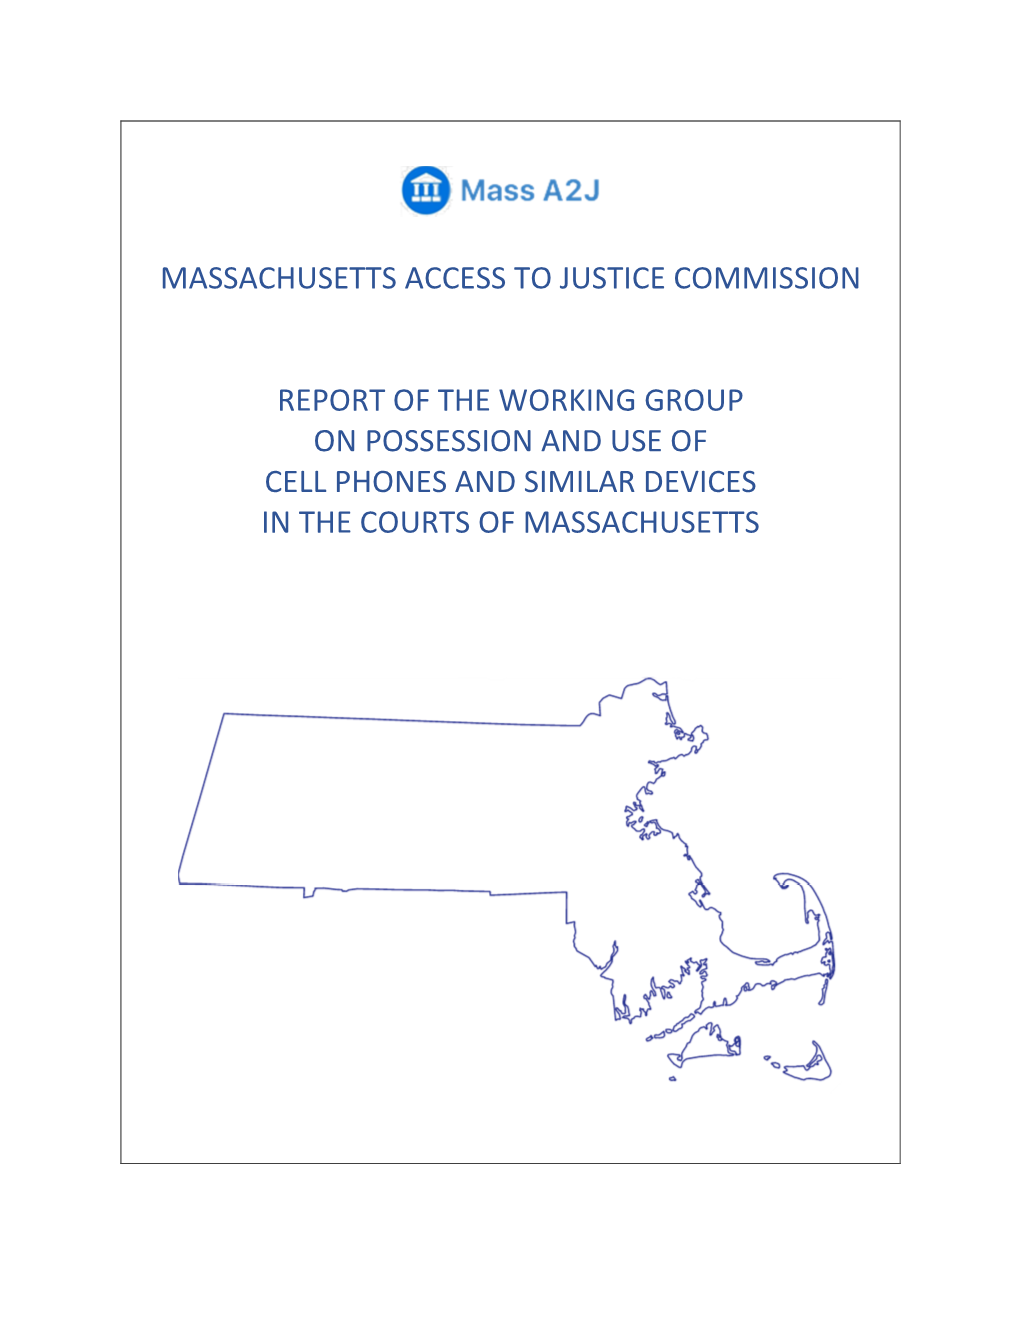 The Massachusetts Access to Justice Commission Report